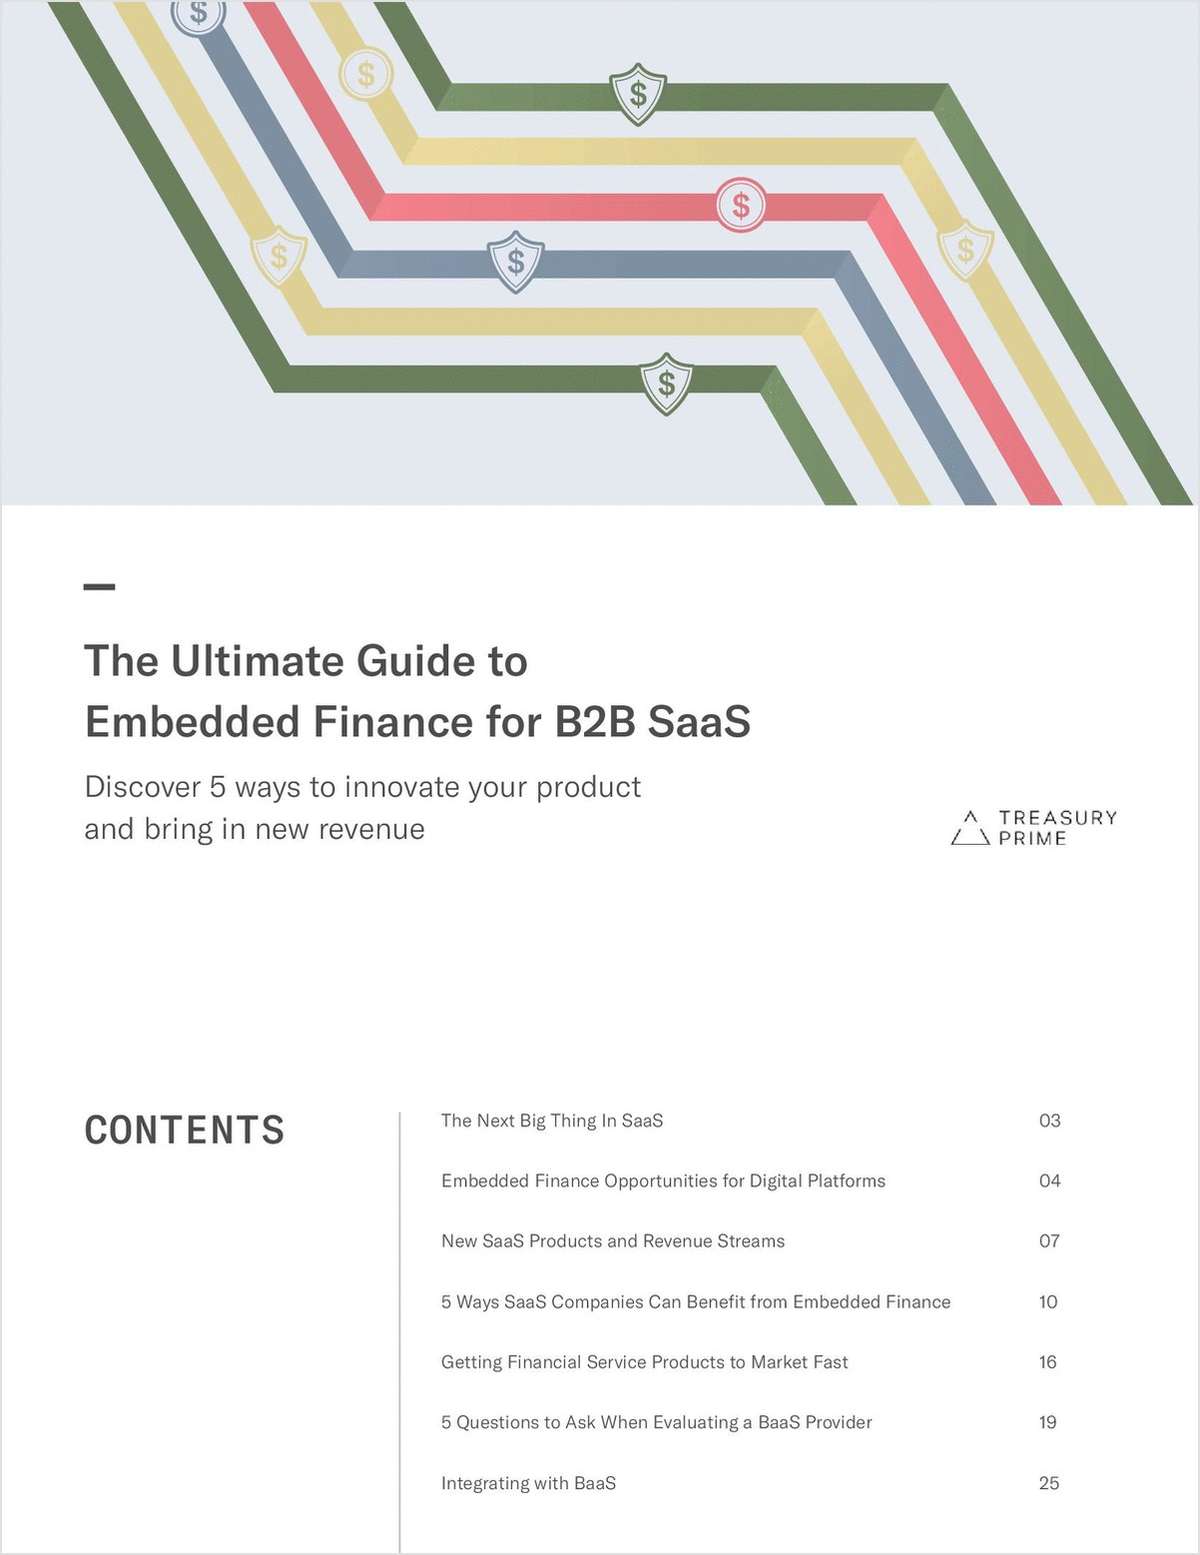 The Ultimate Guide to Embedded Finance for B2B SaaS